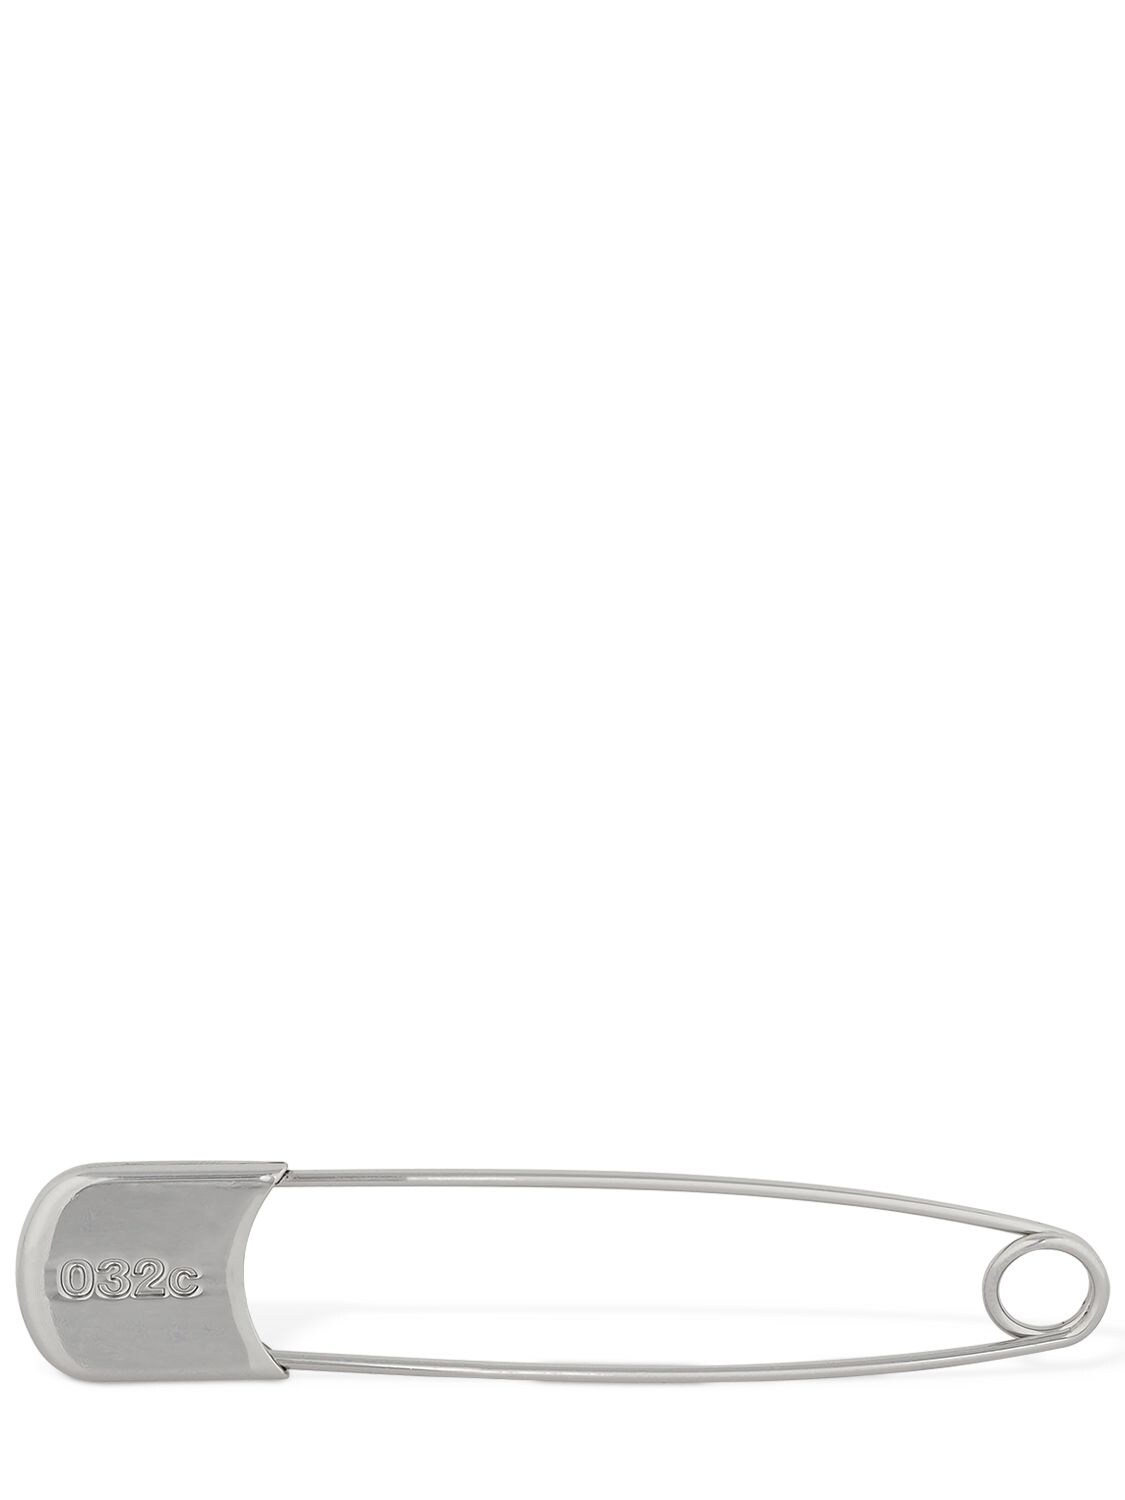 032c Safety Pin With Embossed Logo In Grey